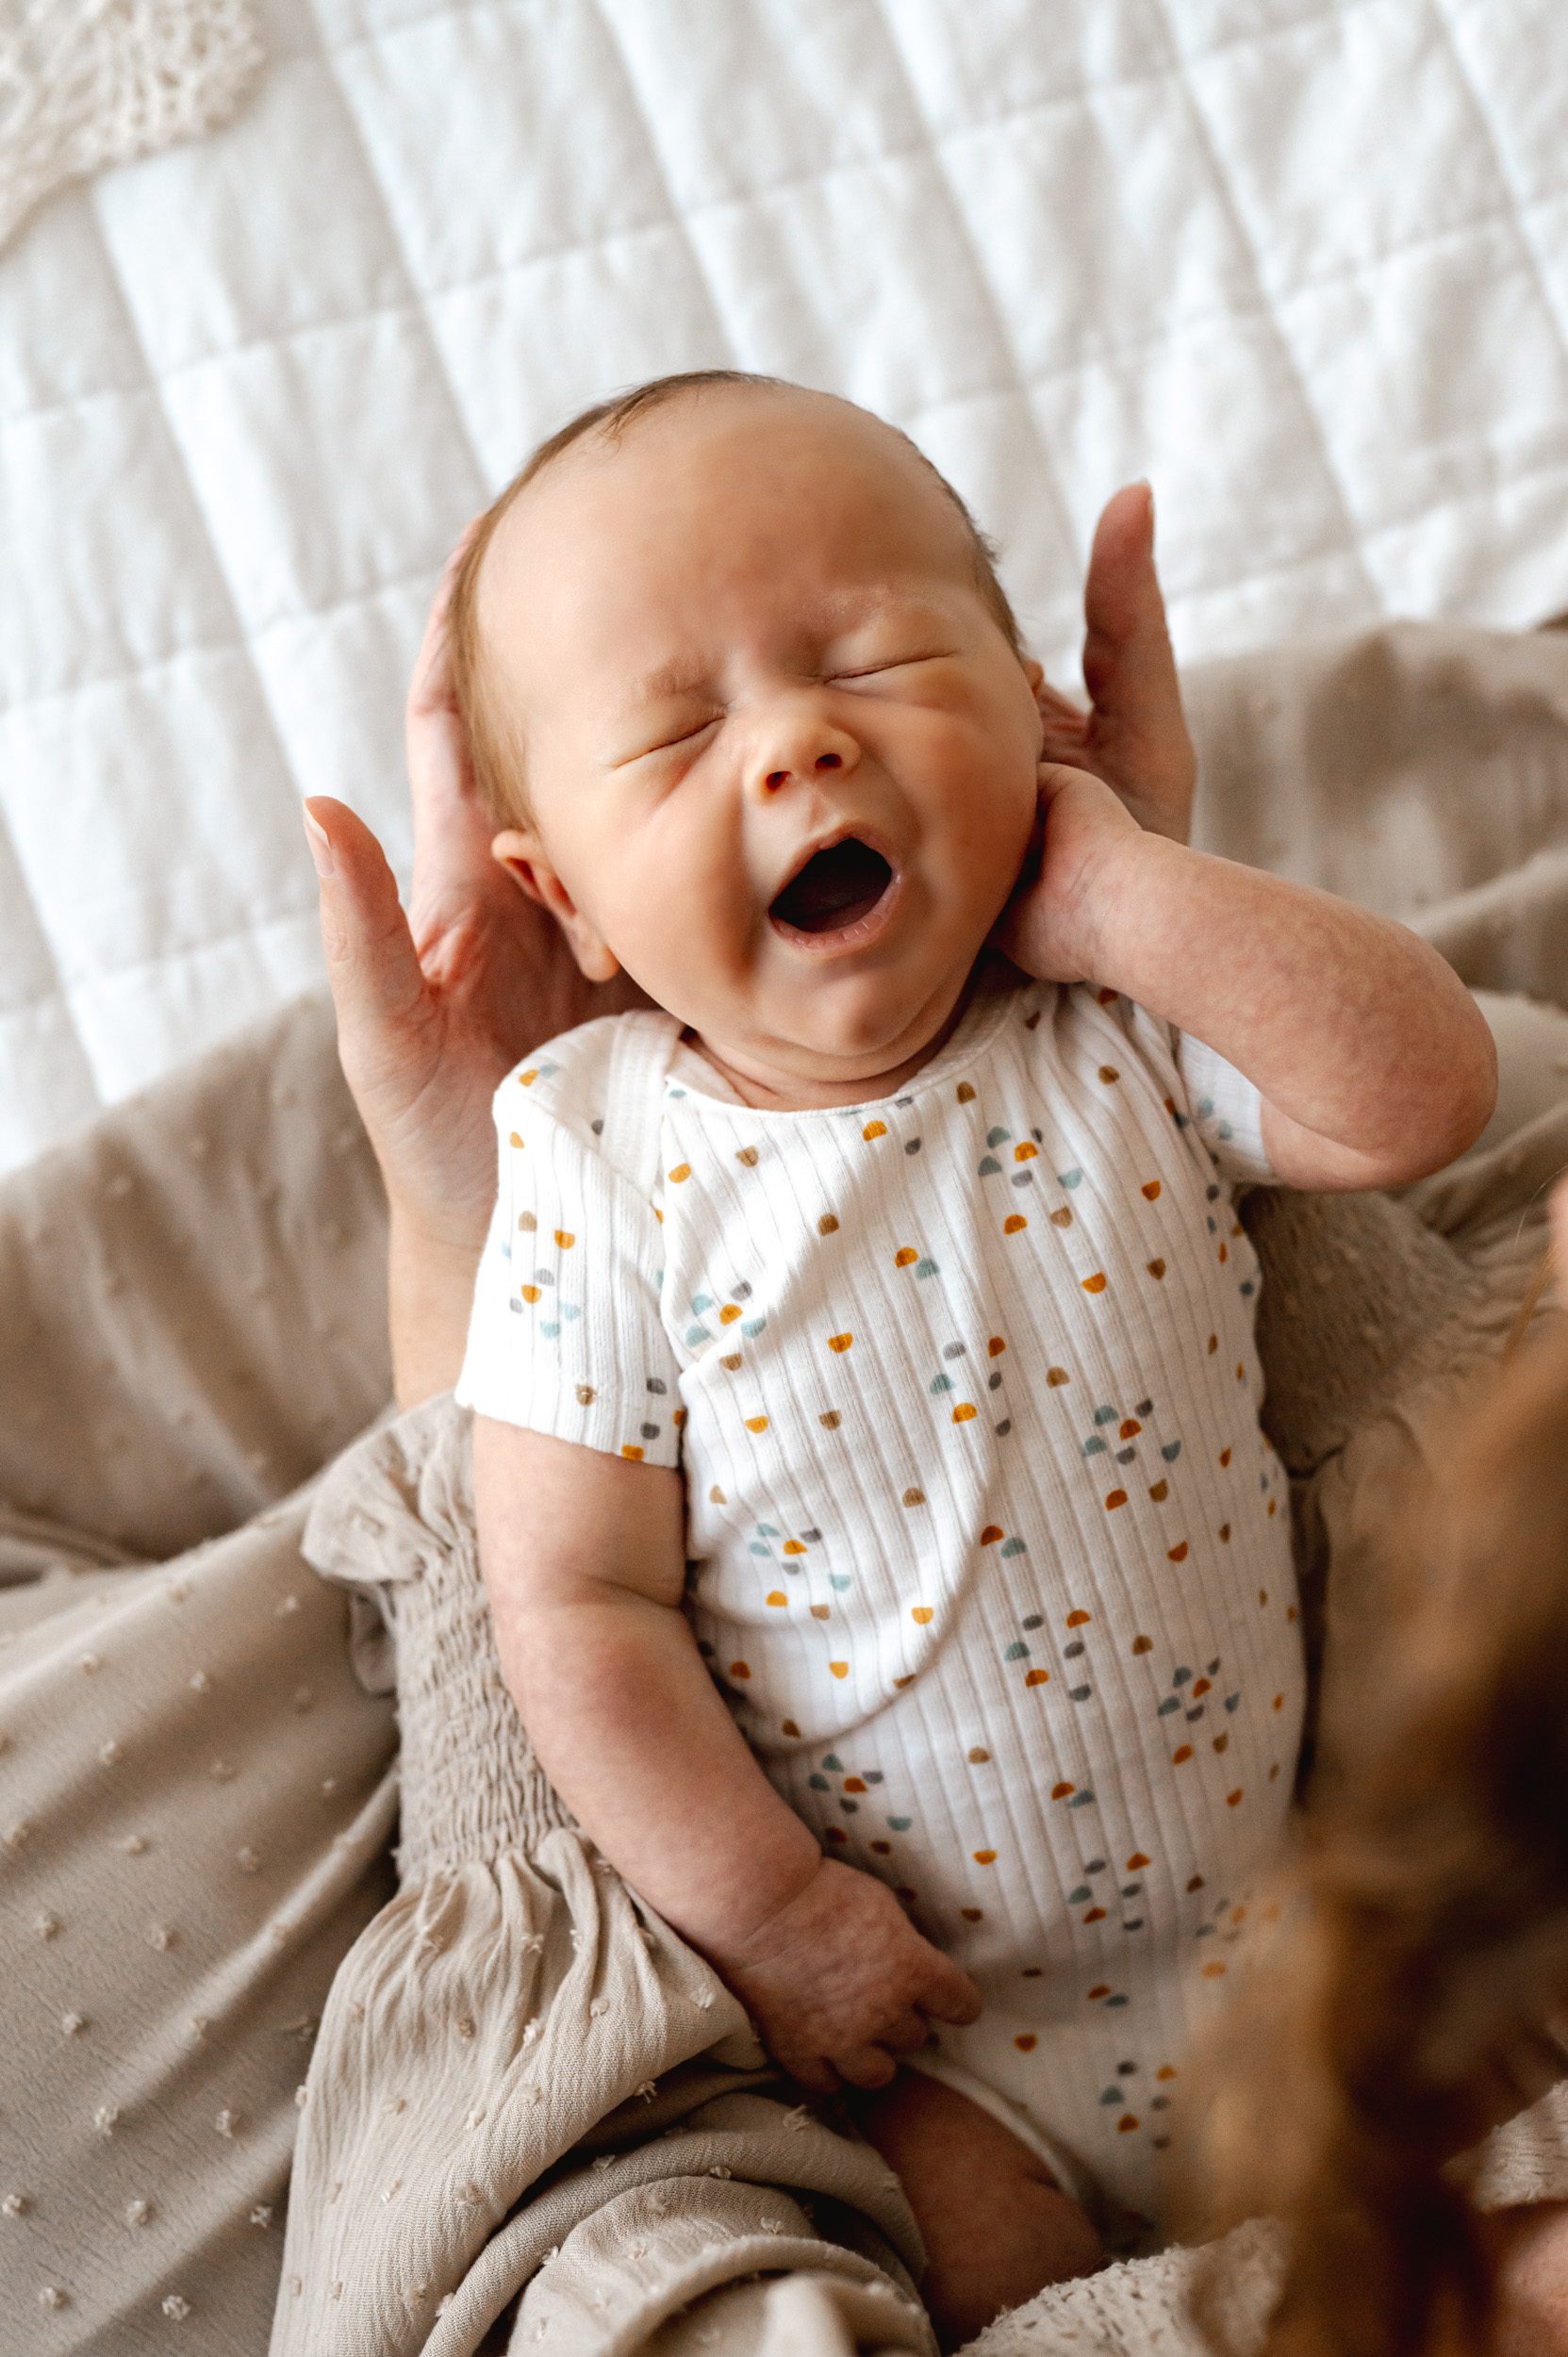 a newborn baby boy yawning and touching his cheek while his mom holds him in her hands during a newborn photoshoot